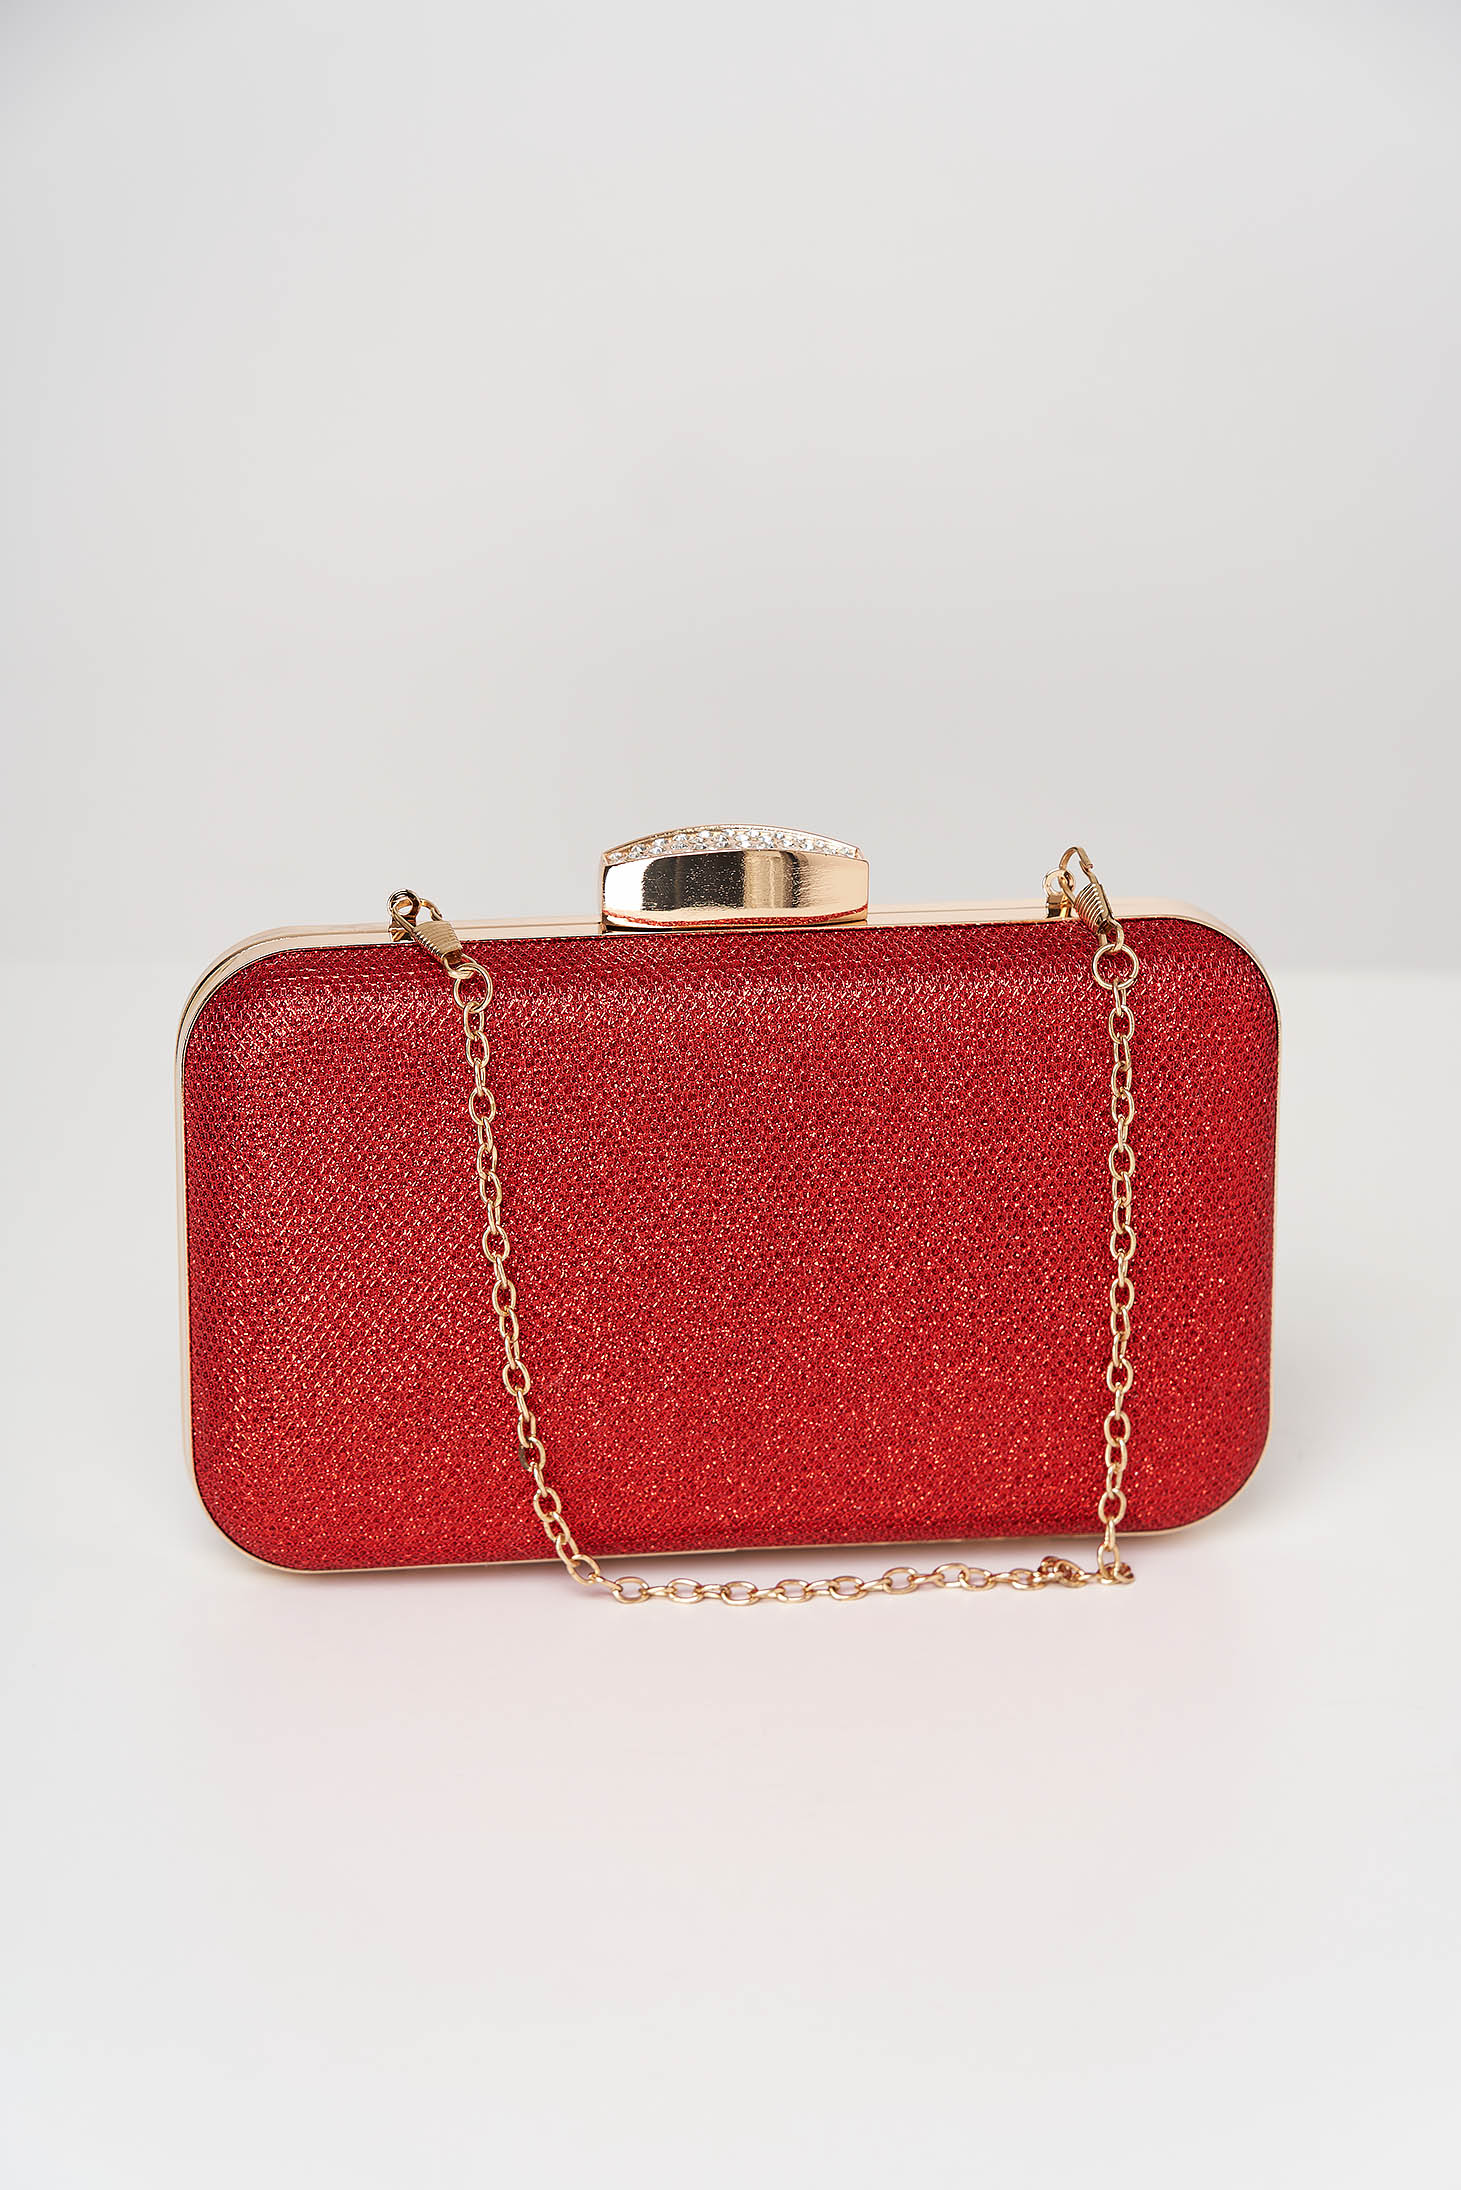 Red bag occasional accessorized with chain detachable chain with crystal embellished details